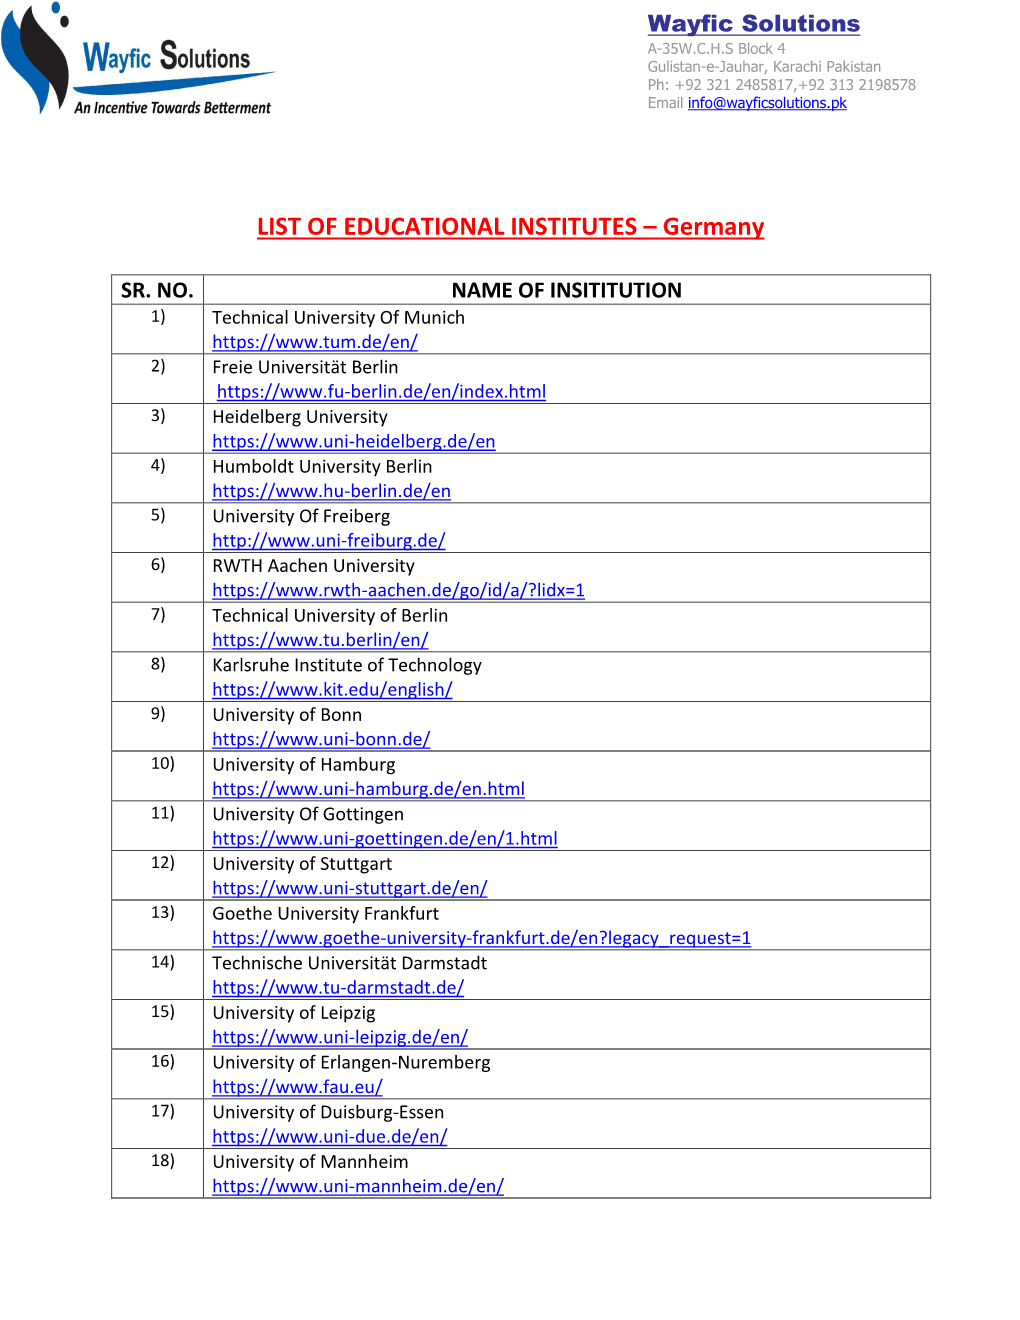 LIST of EDUCATIONAL INSTITUTES – Germany